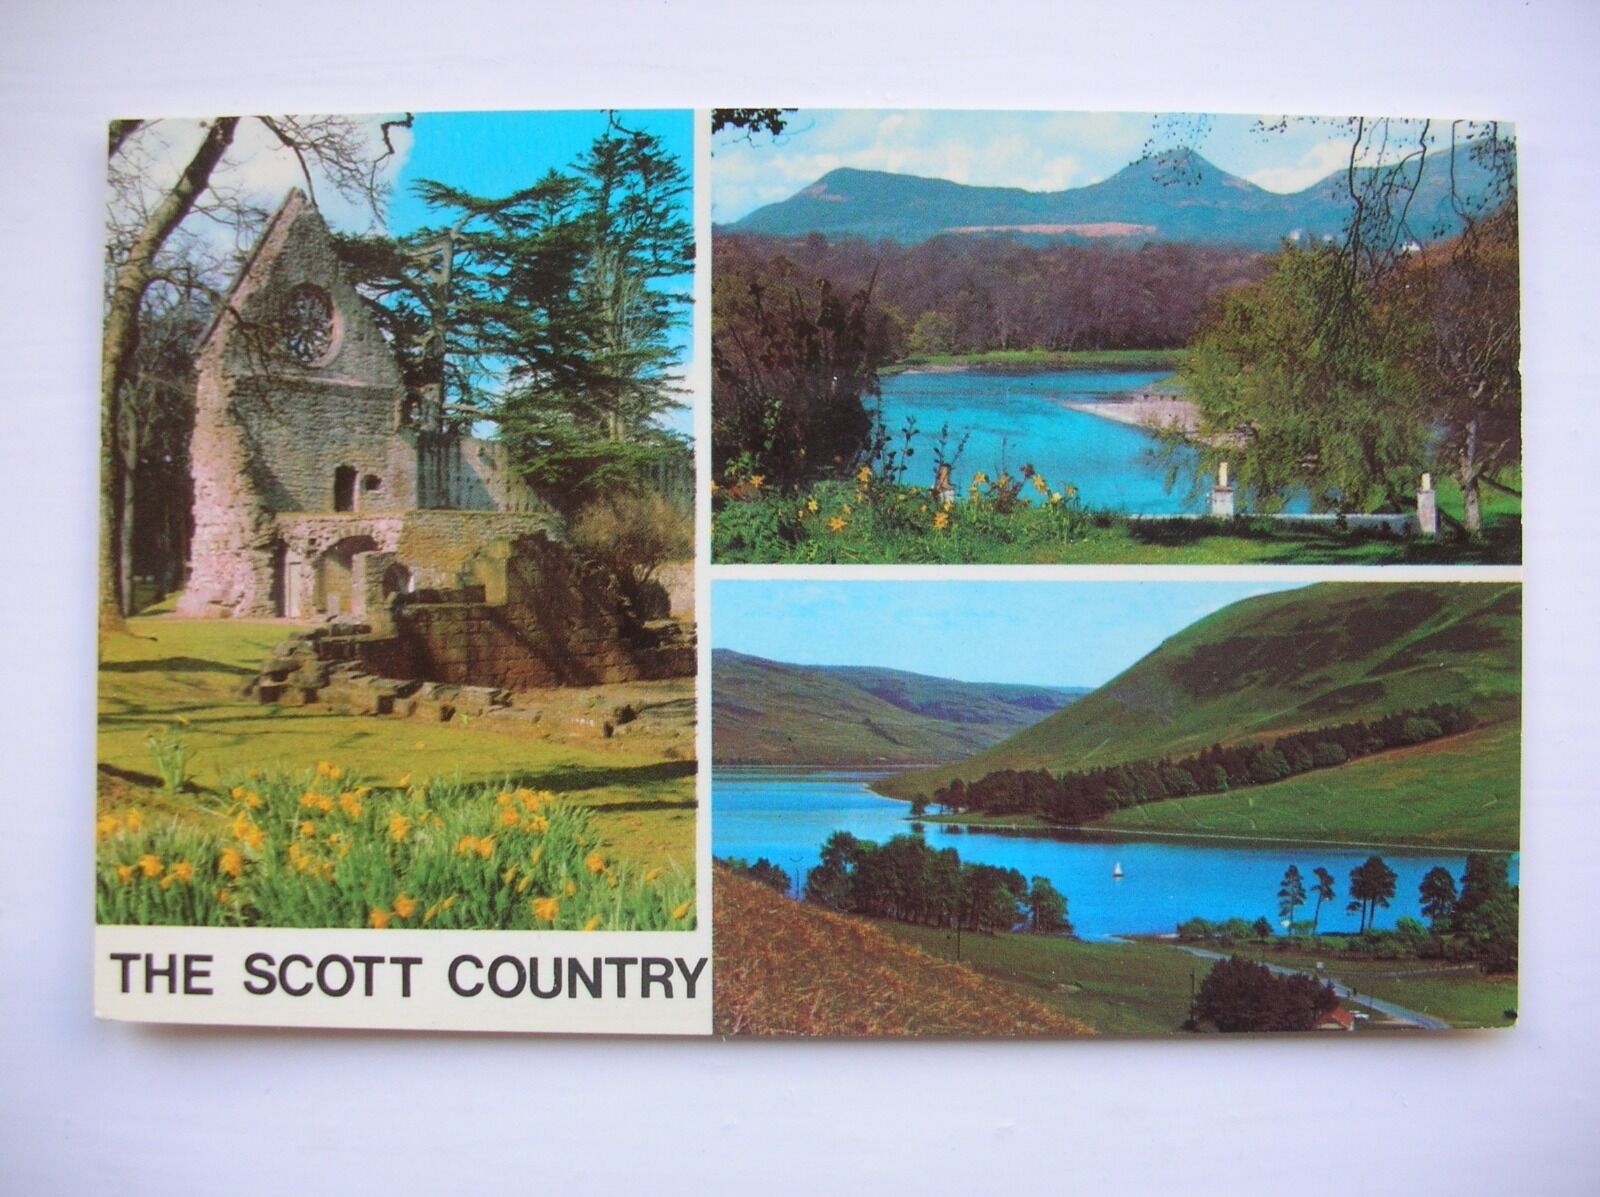 House Clearance - (Walter) Scott Country. (Dryburgh, St. Mary's Loch etc)